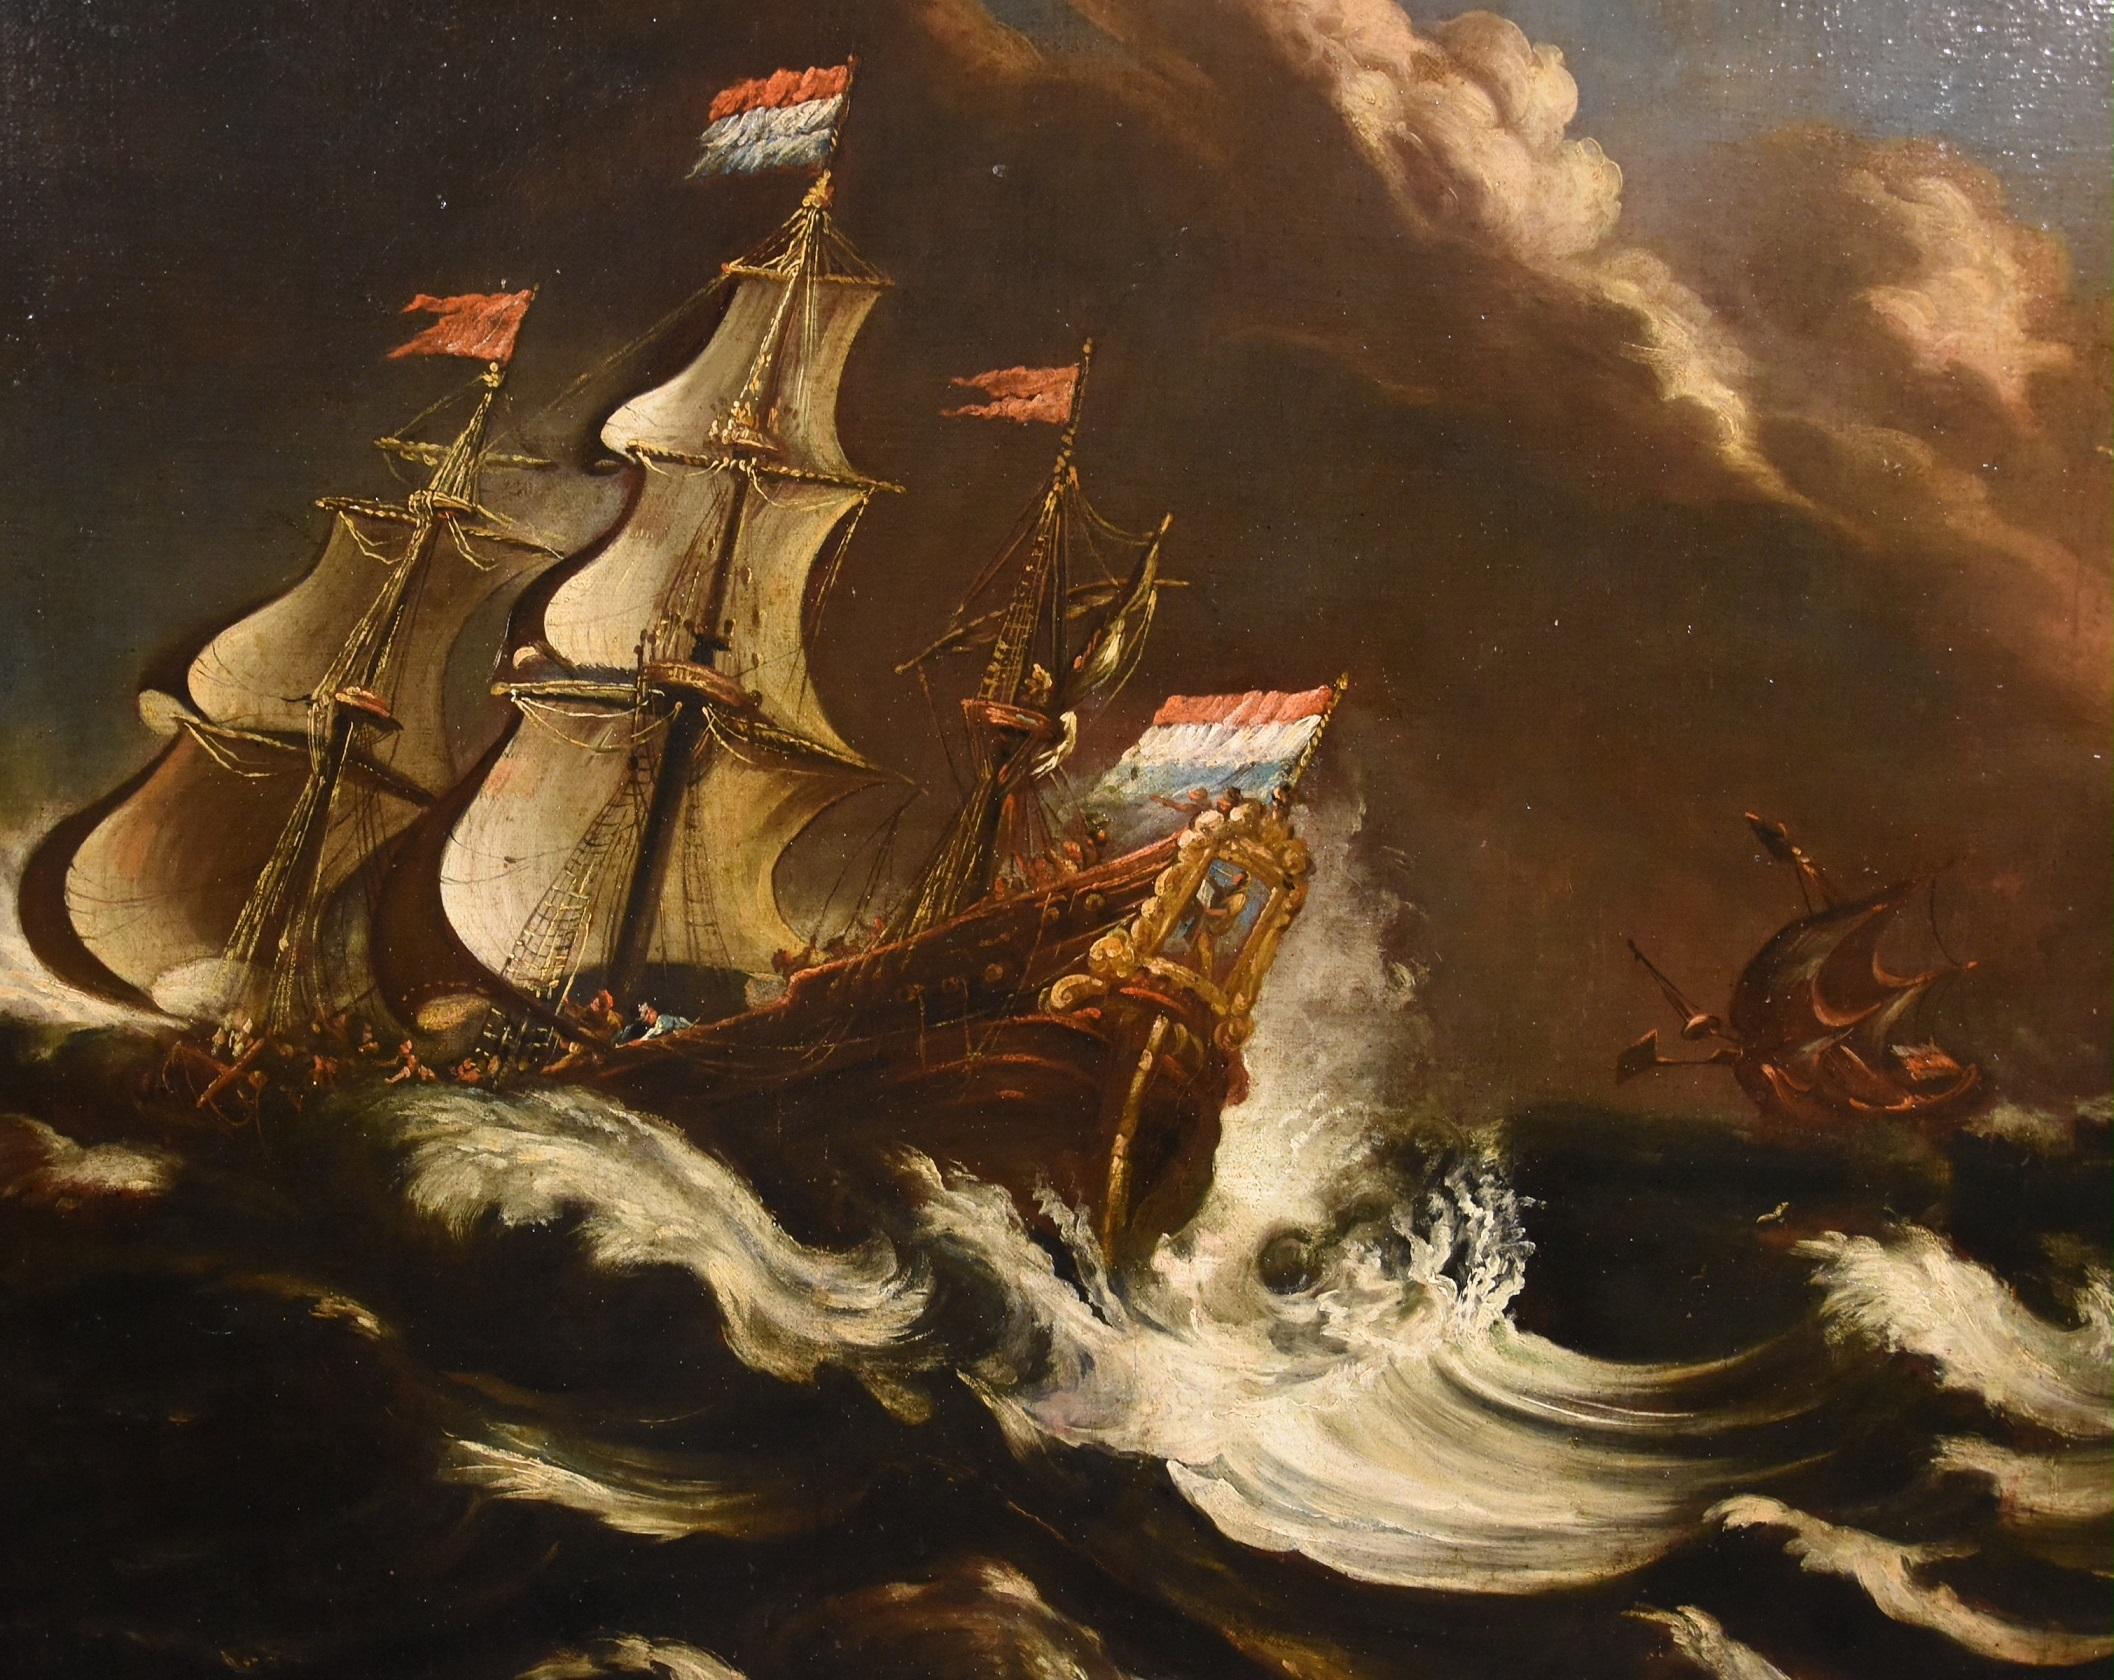 Stormy Ships Van Plattenberg Marina Paint Oil on canvas Old master 17th Century  For Sale 3